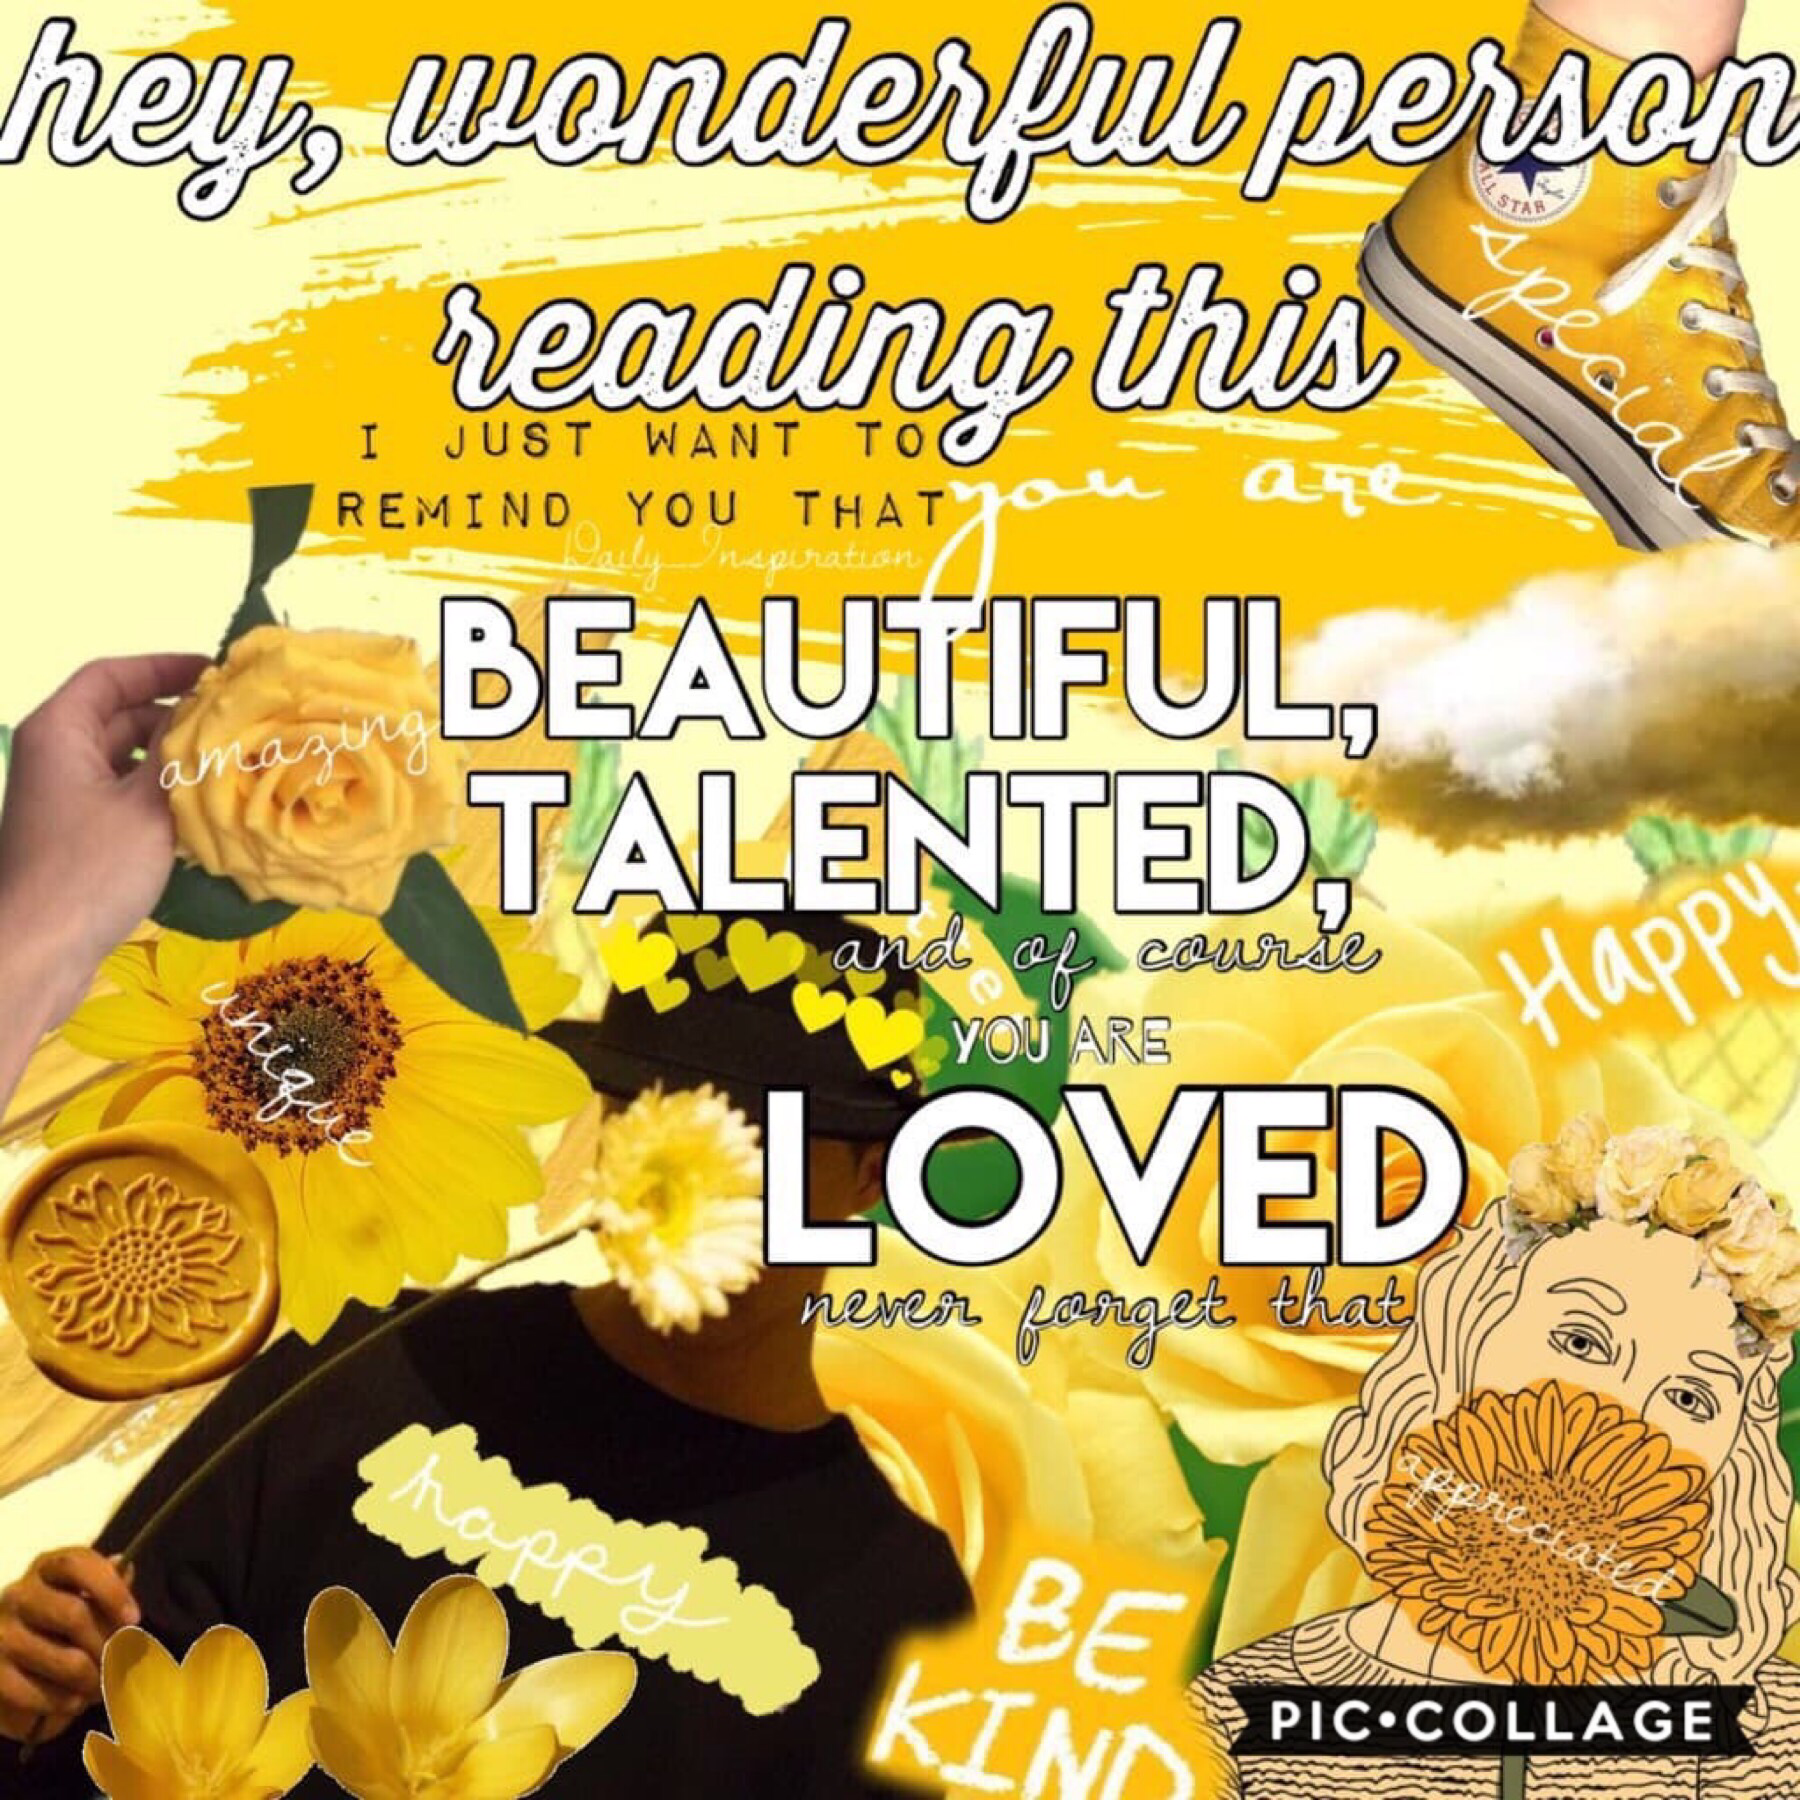 ✨Tap✨
Hey y’all it’s been awhile. I hope y’all are doing well. I don’t even know where to start... my life has been crazy busy recently. Anyway, I made this collage awhile ago and never posted it... enjoy💕😚 - -ebullience-
9/21/19